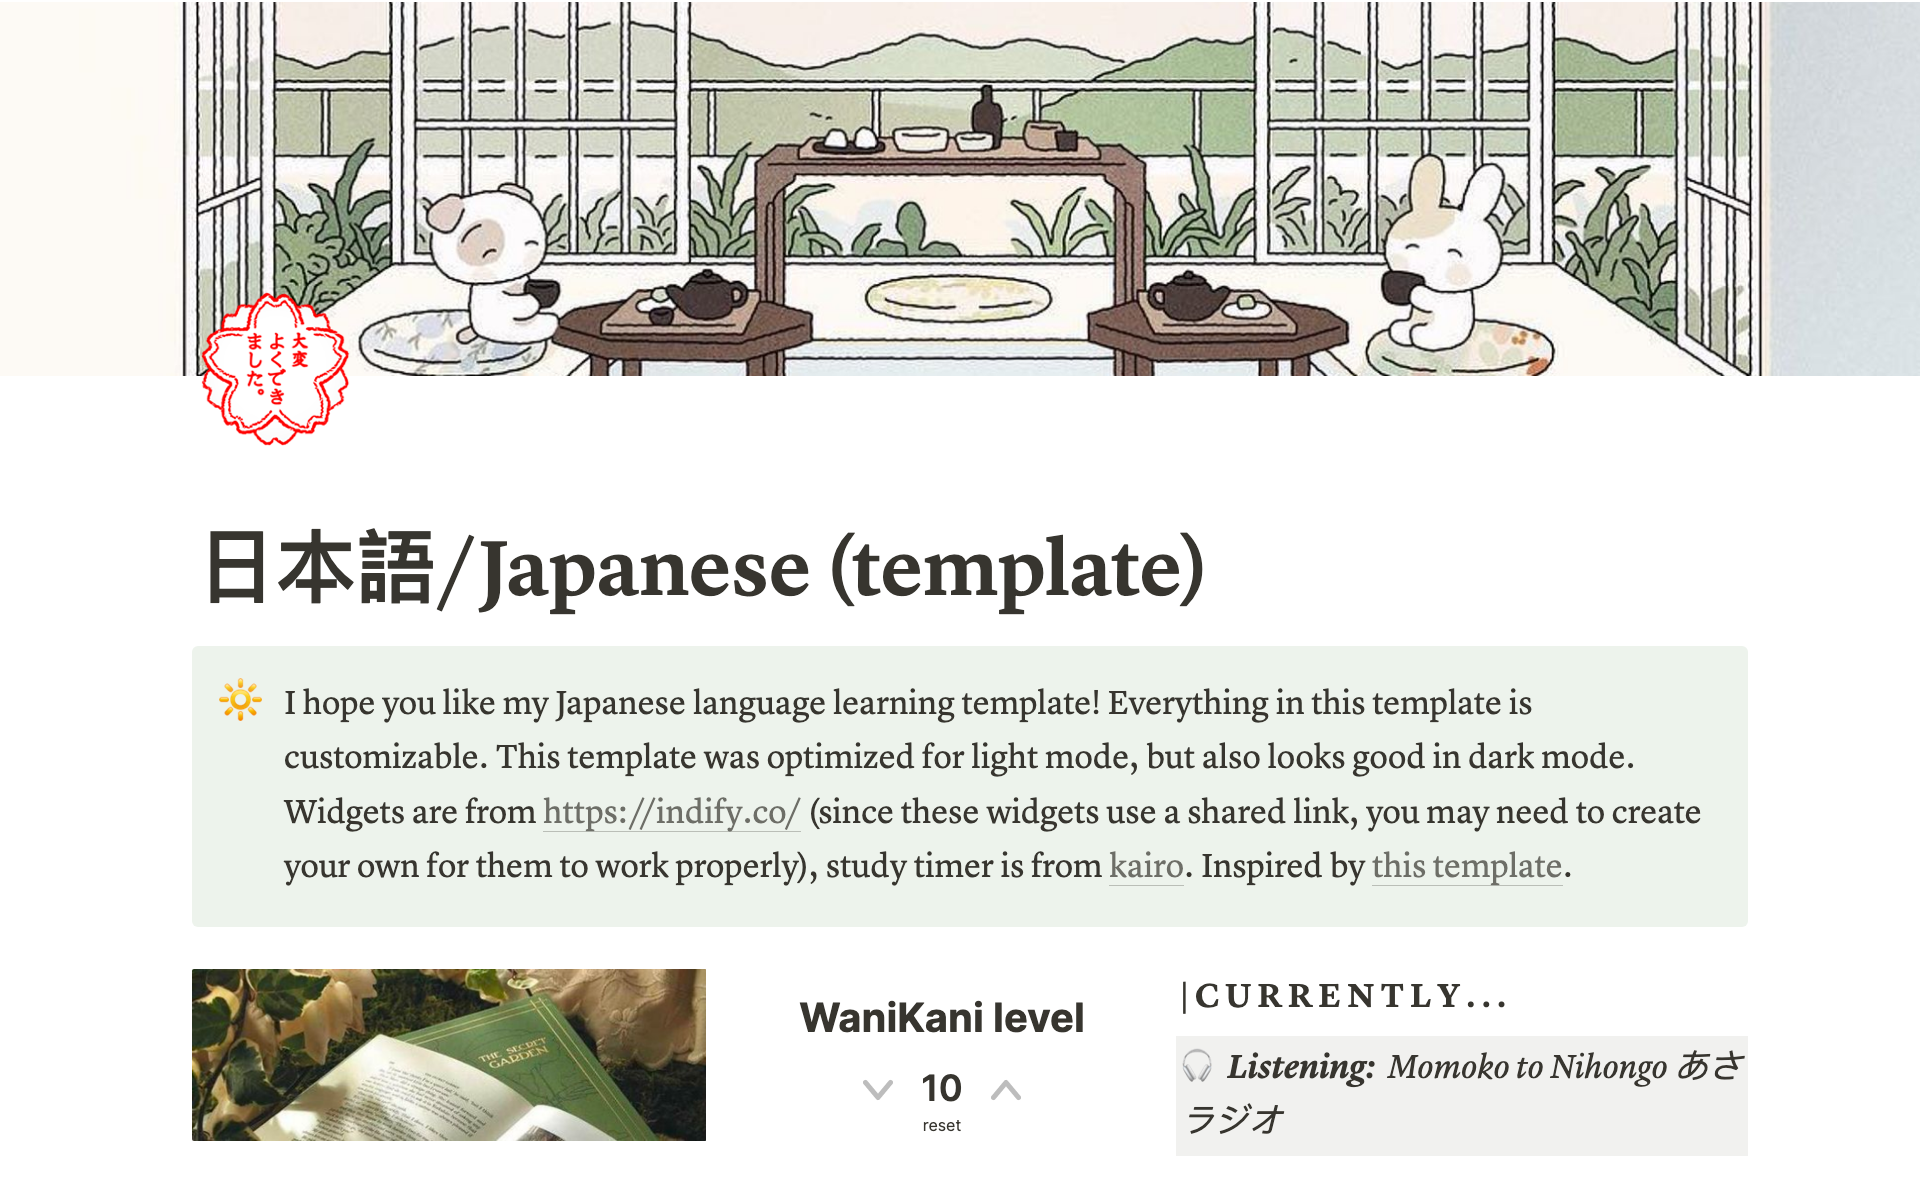 Template for Japanese language learners to organize and motivate your studies